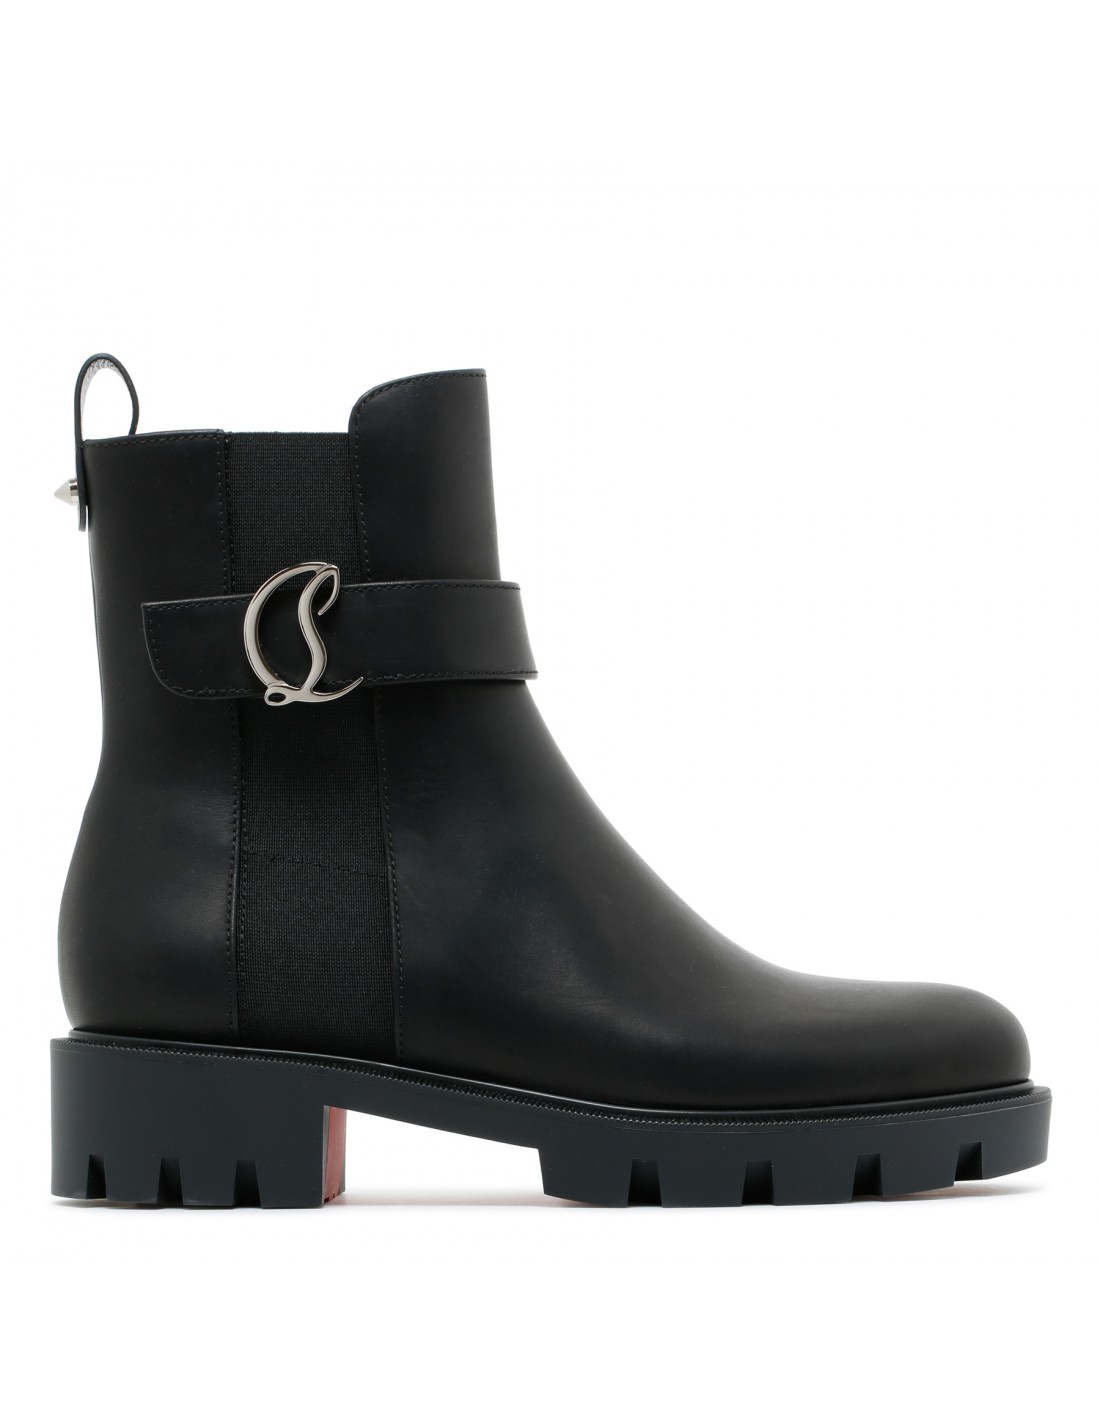 CL Chelsea Booty Lug boots